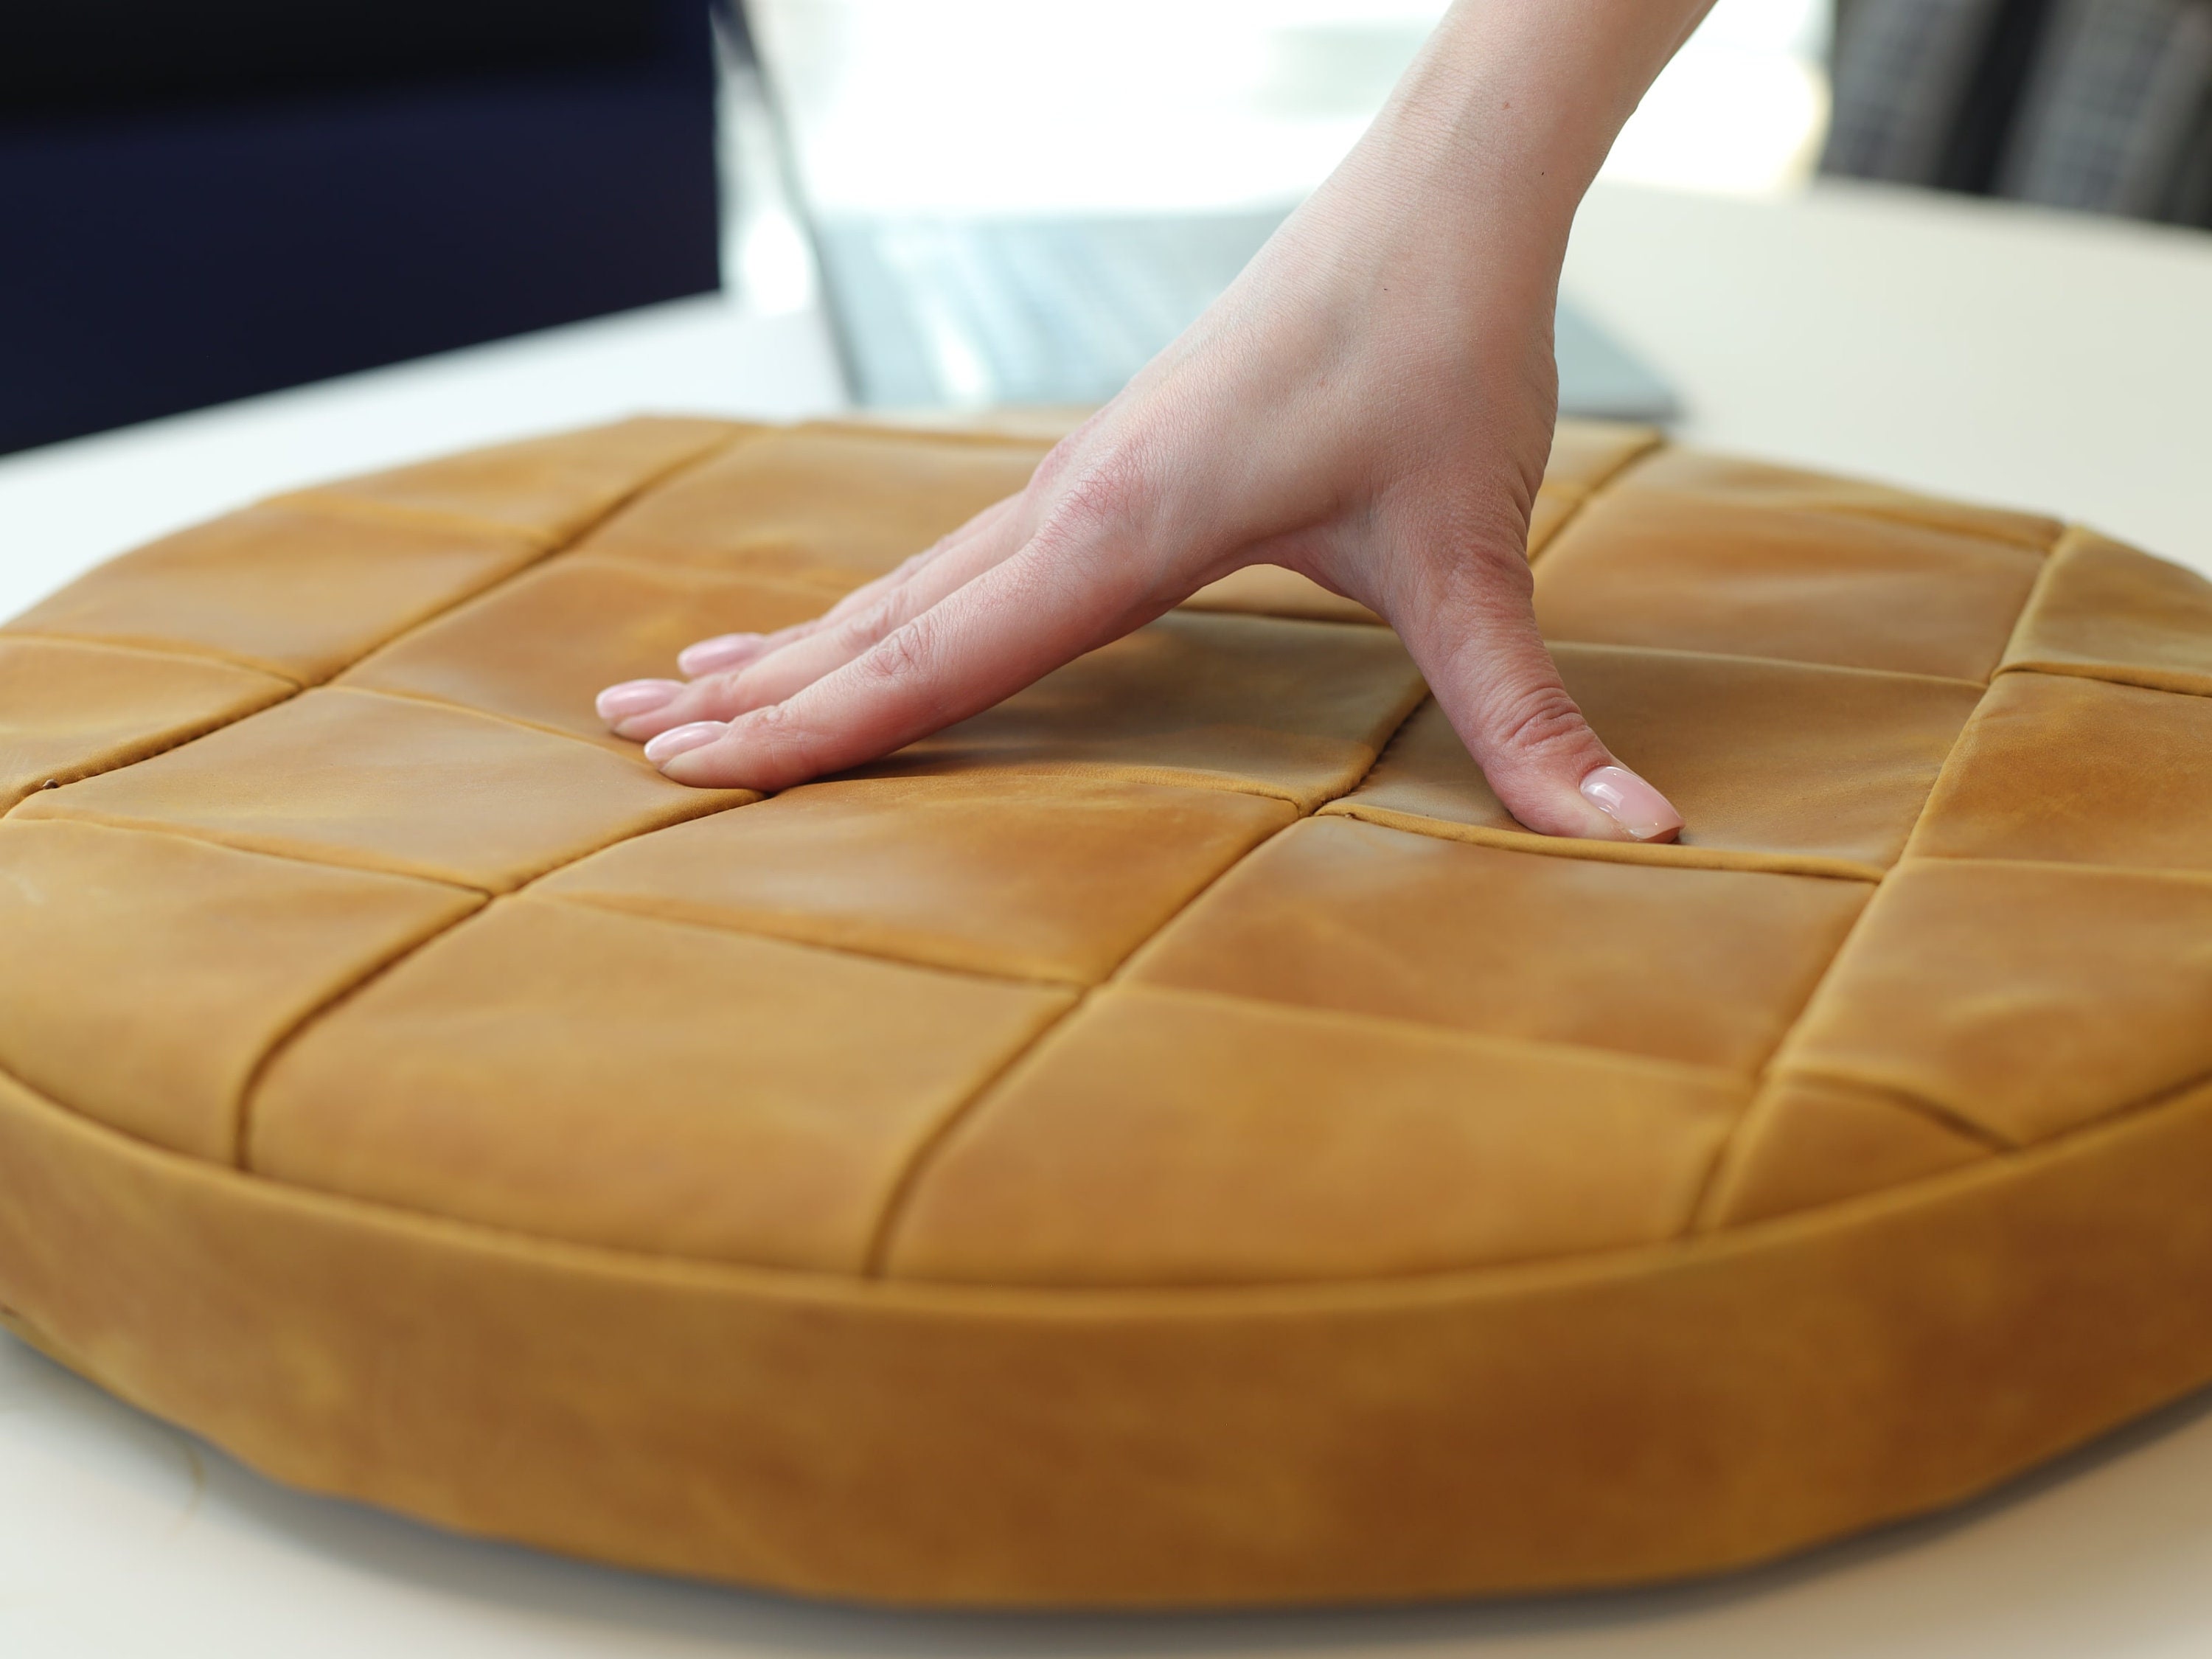 Round Leather Seat Cushion for Stool - Bed Bath & Beyond - 31733956